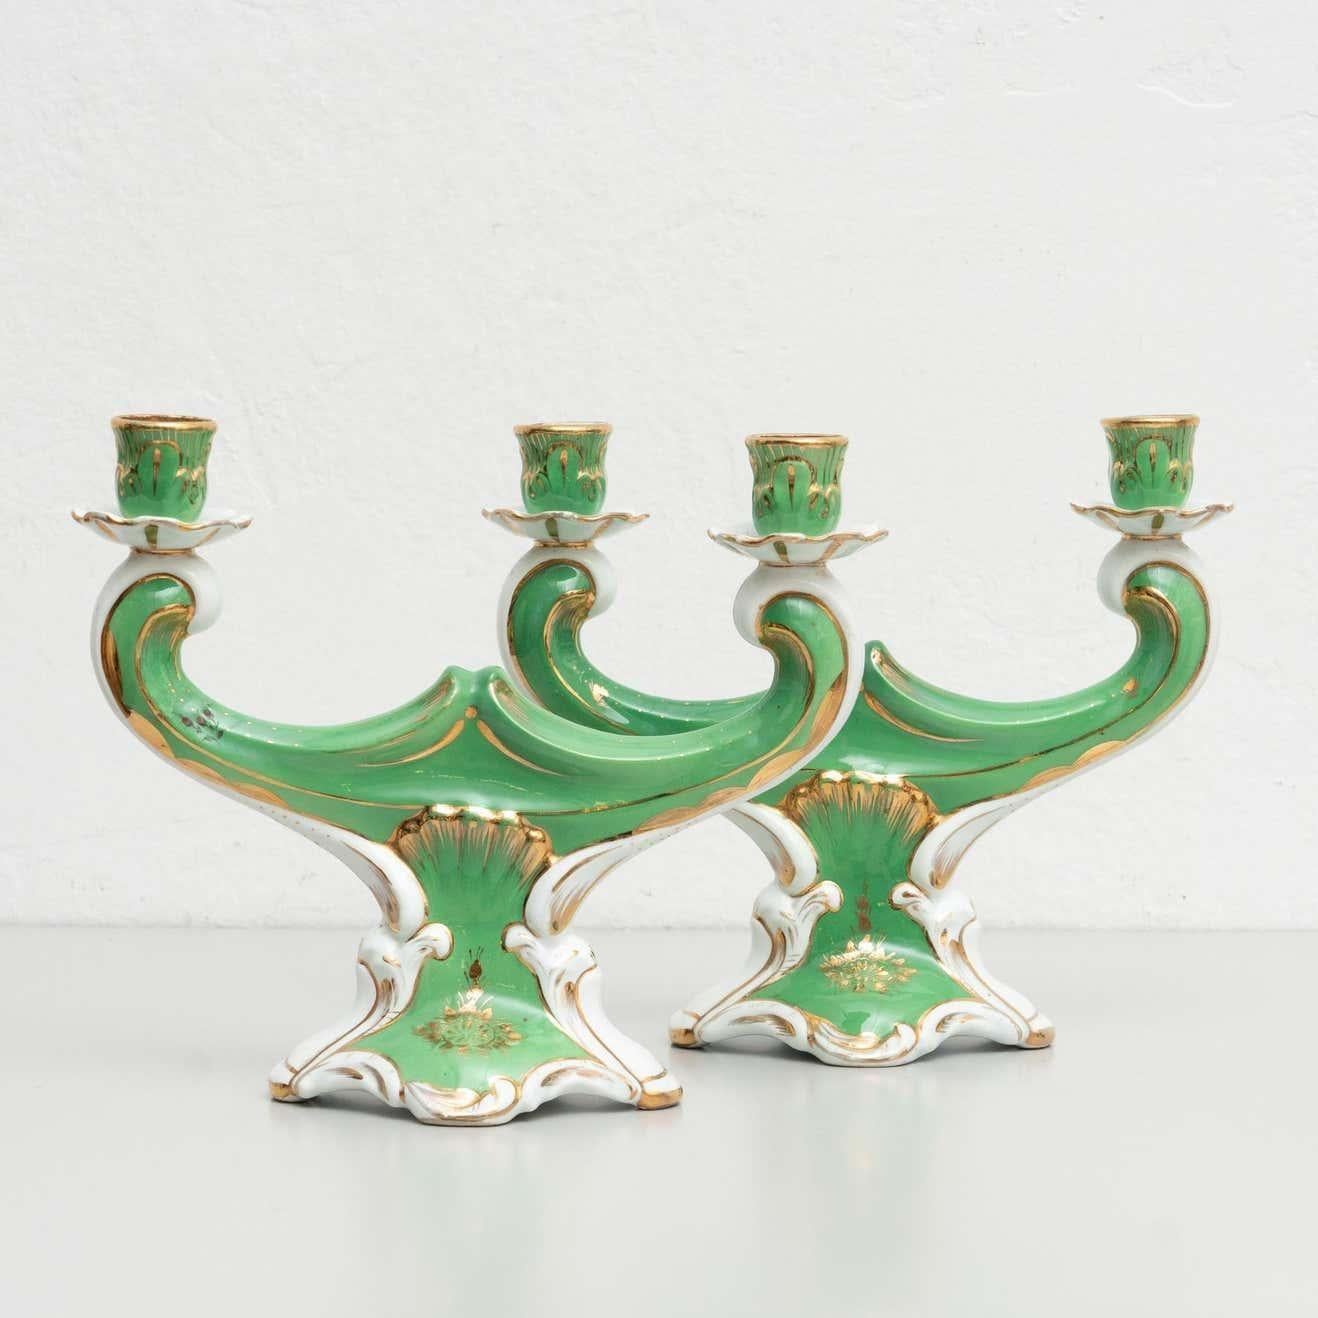 Spanish Set of 2 Hand Painted Ceramic Candle Holders, circa 1930 For Sale